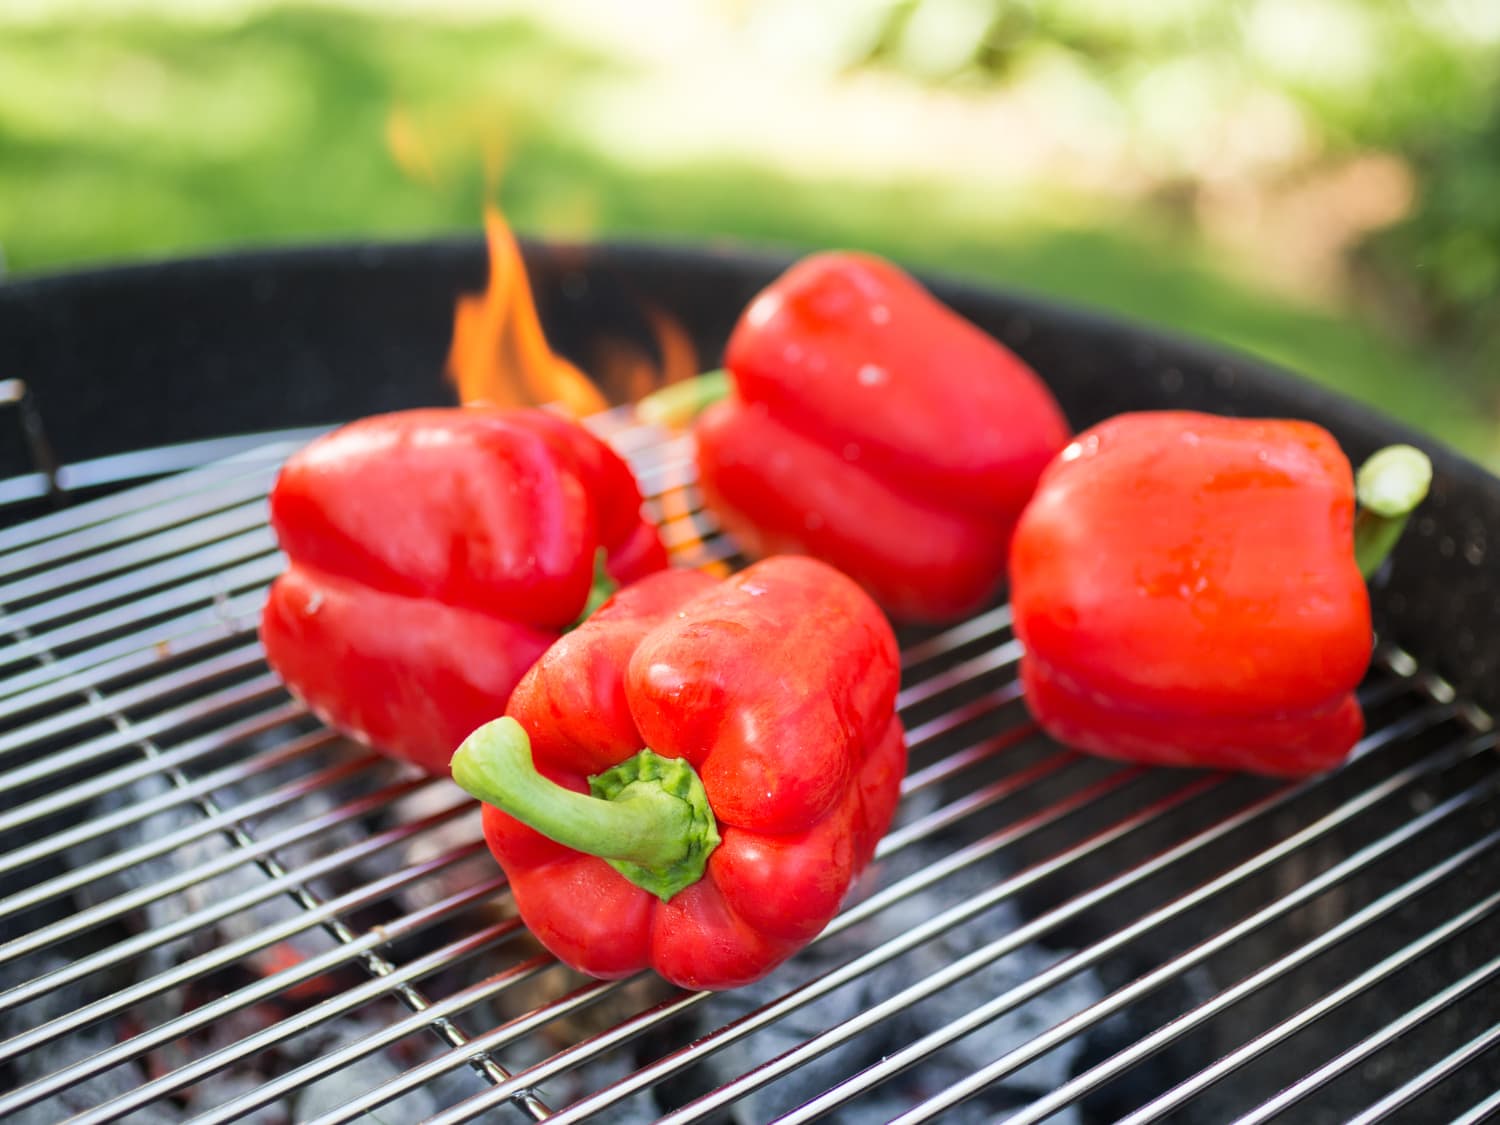 How To Roast Peppers (Using a Grill, Stovetop, or Broiler)